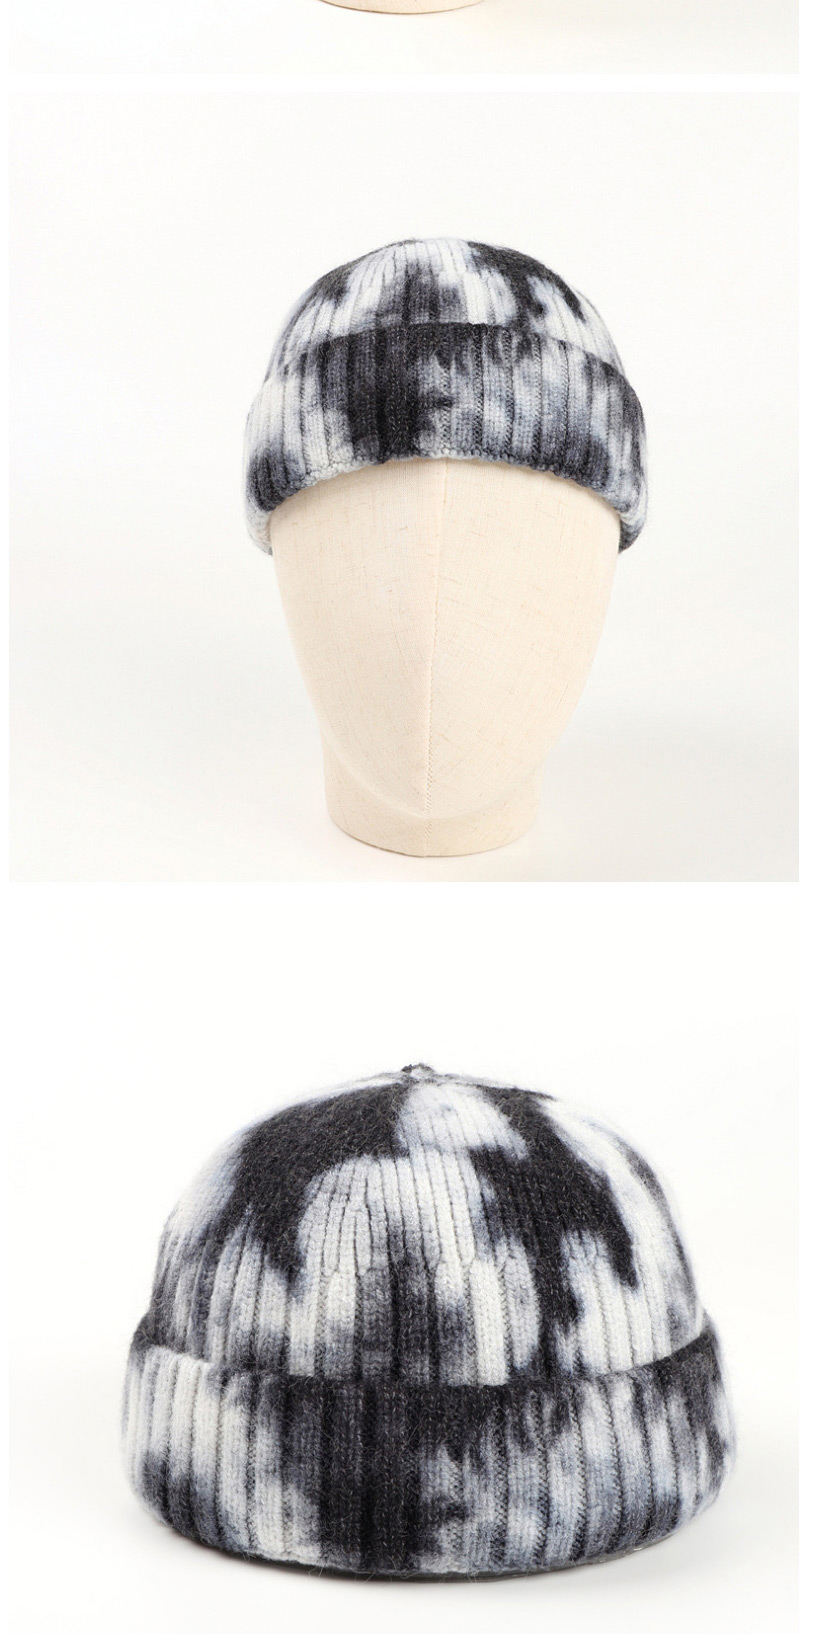 Fashion Black Tie-dyed Mohair Curled Knitted Beanie Hat,Knitting Wool Hats